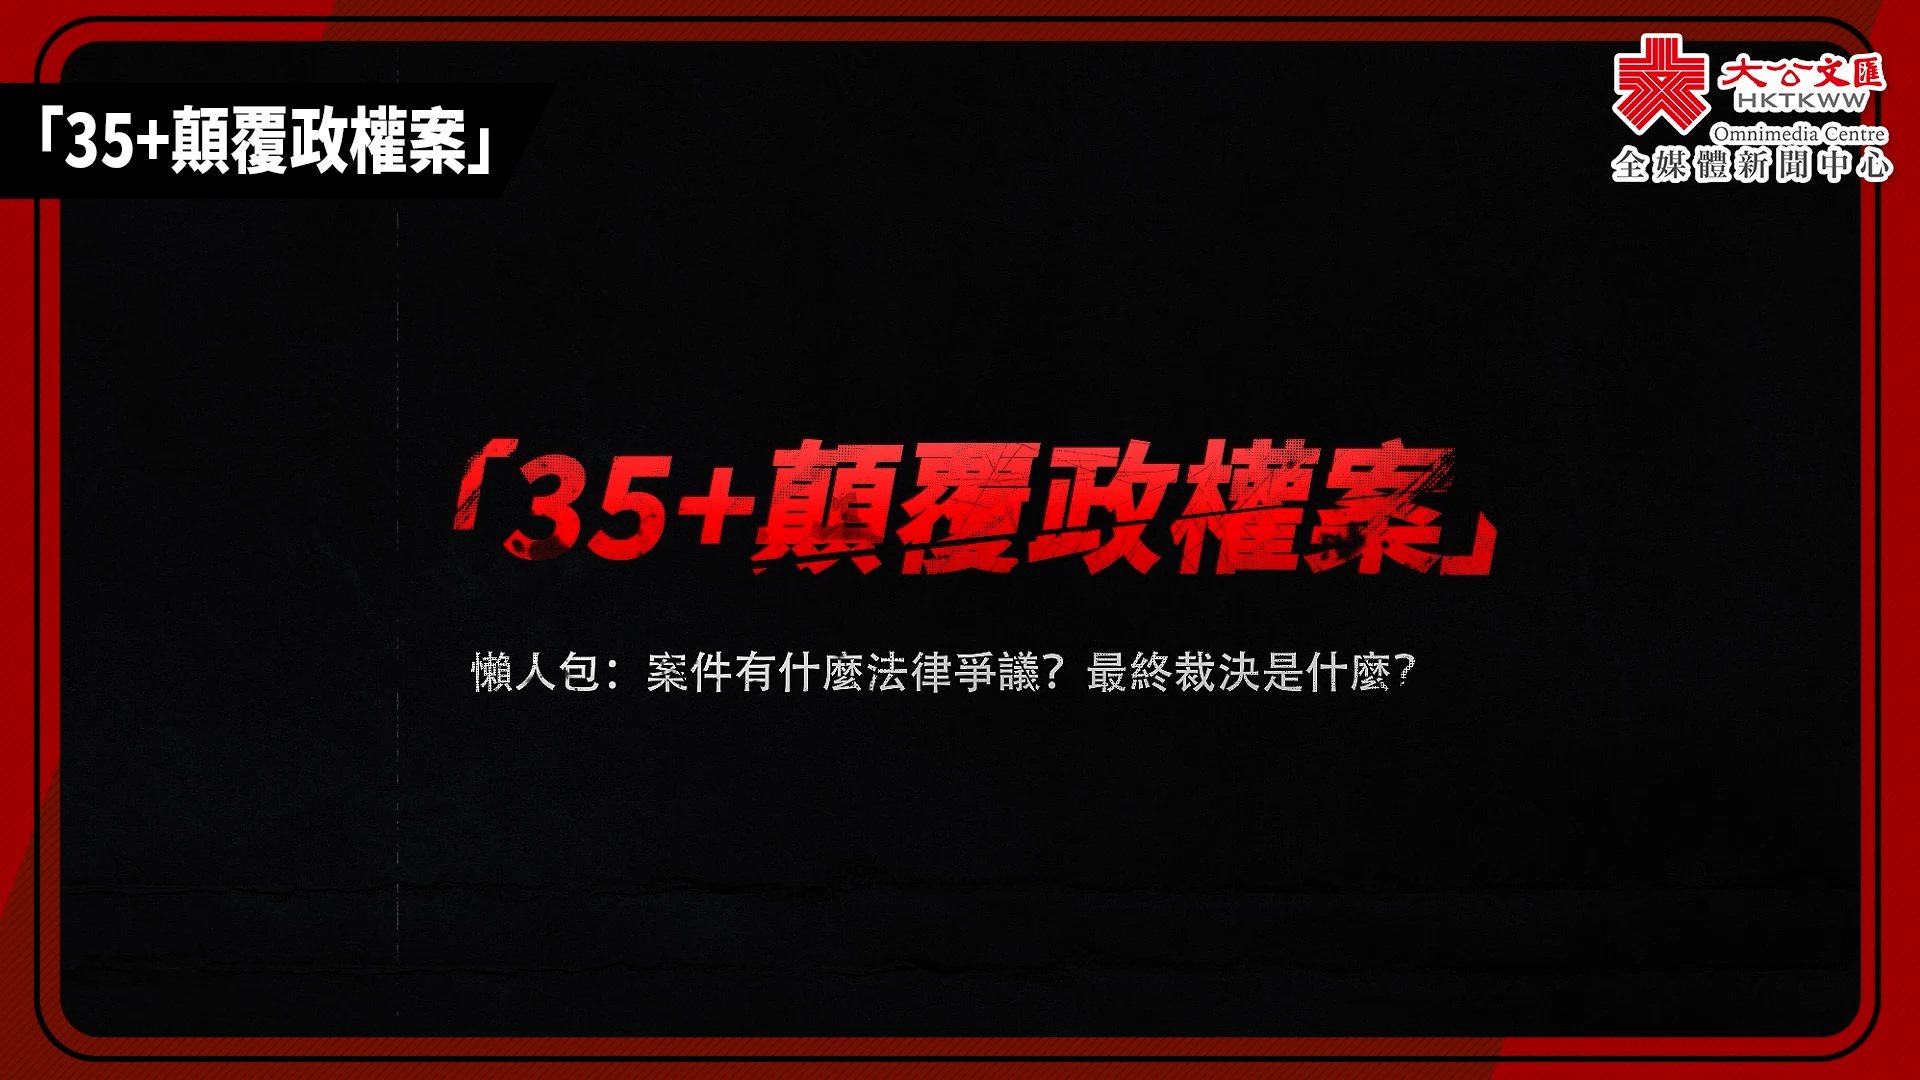  Lazy Man Bao: What is the legal dispute about the "35+subversion of regime" case? What is the final verdict?